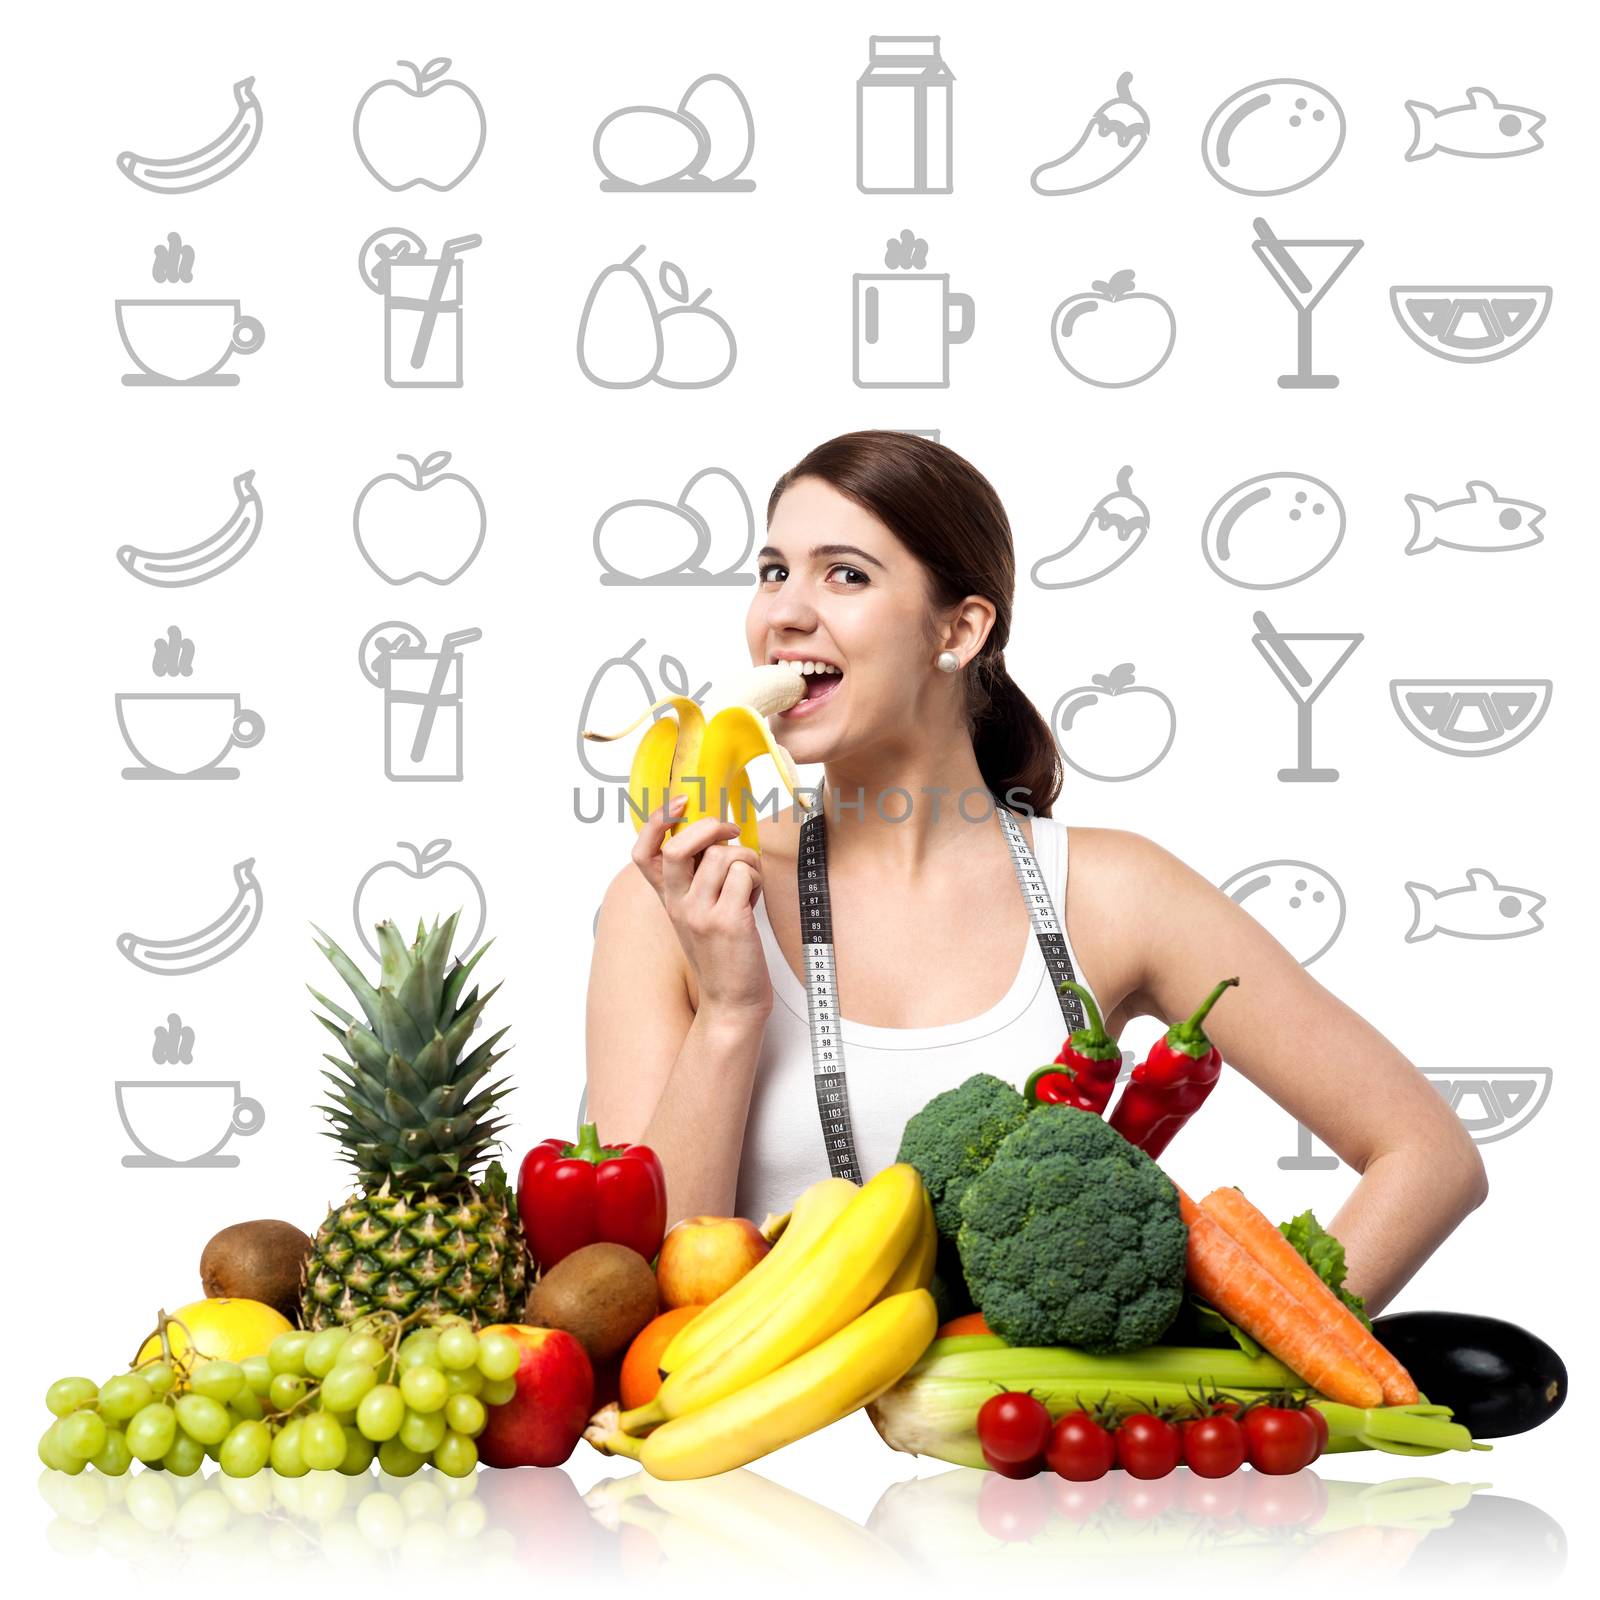 Fit smiling woman enjoying banana by stockyimages